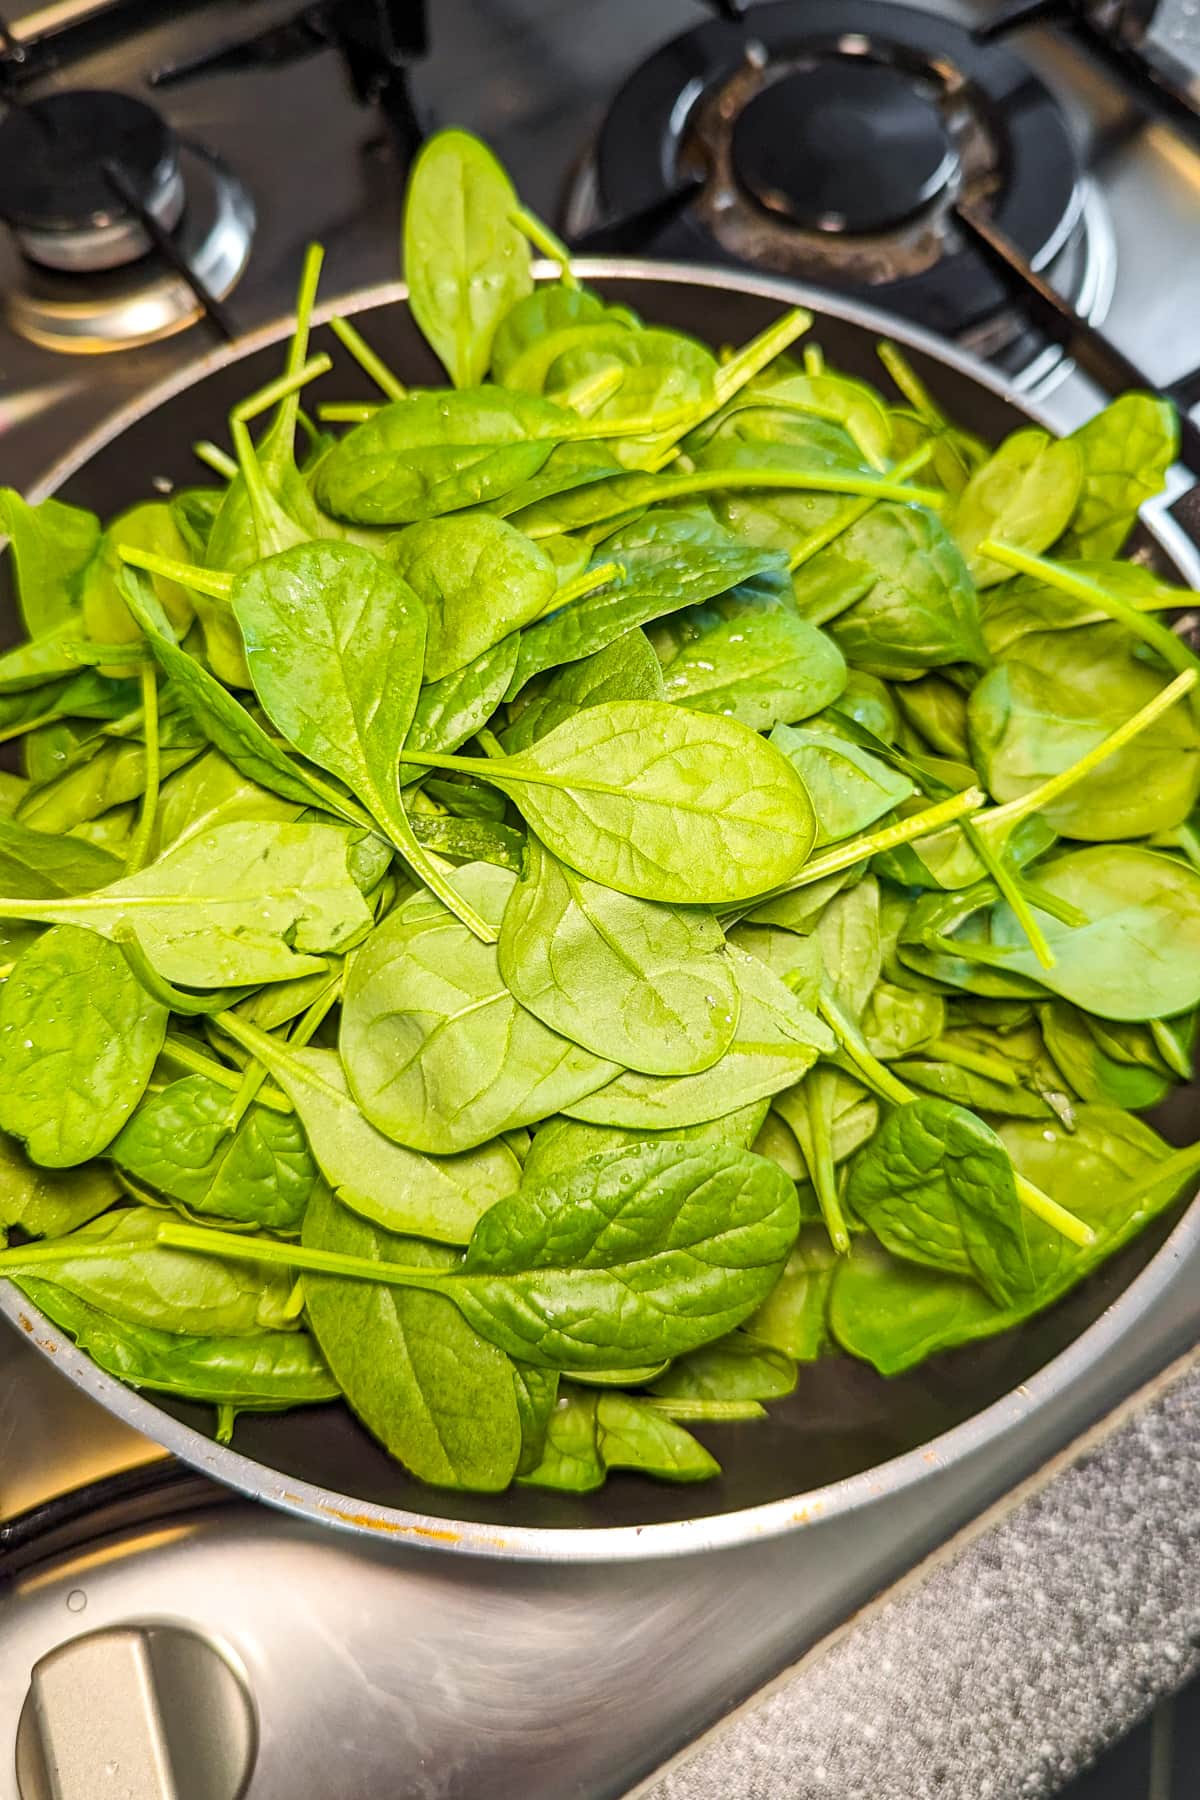 A bunch of fresh spinach in a frying pan on the stove.